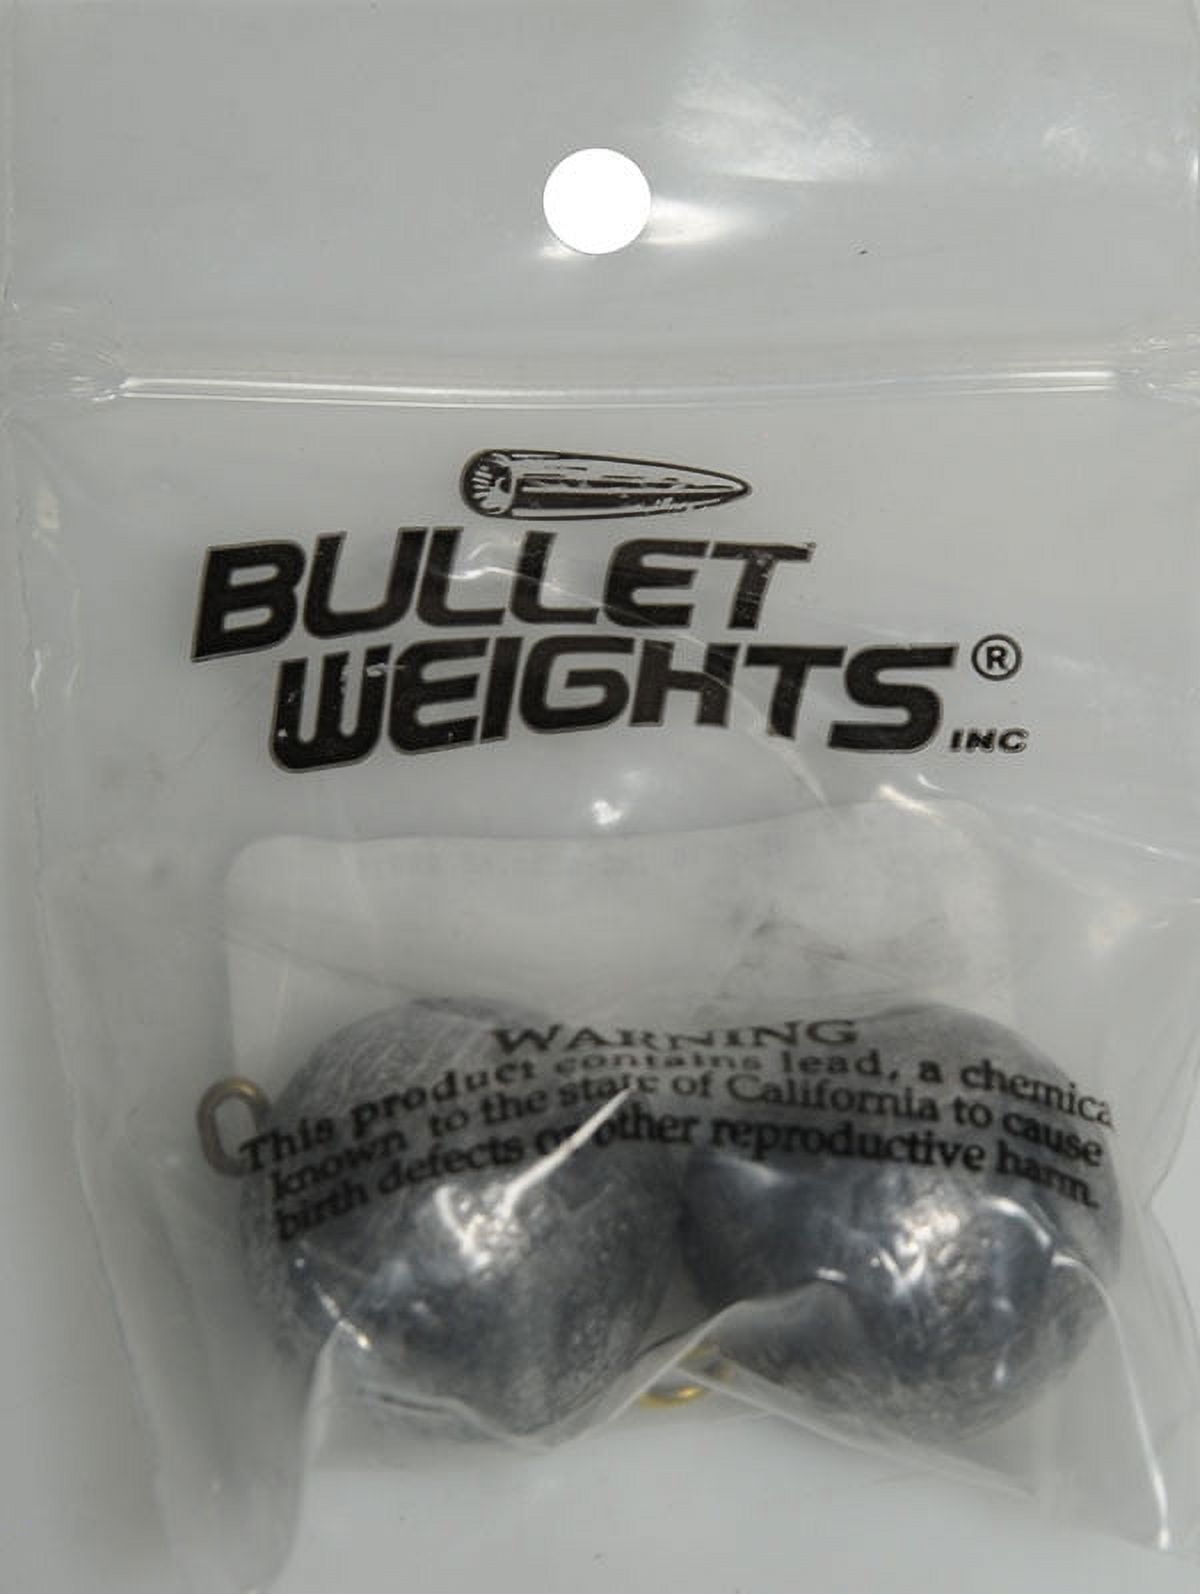 Bullet Weights® Cannon Ball 4 Oz., 2 sinkers 